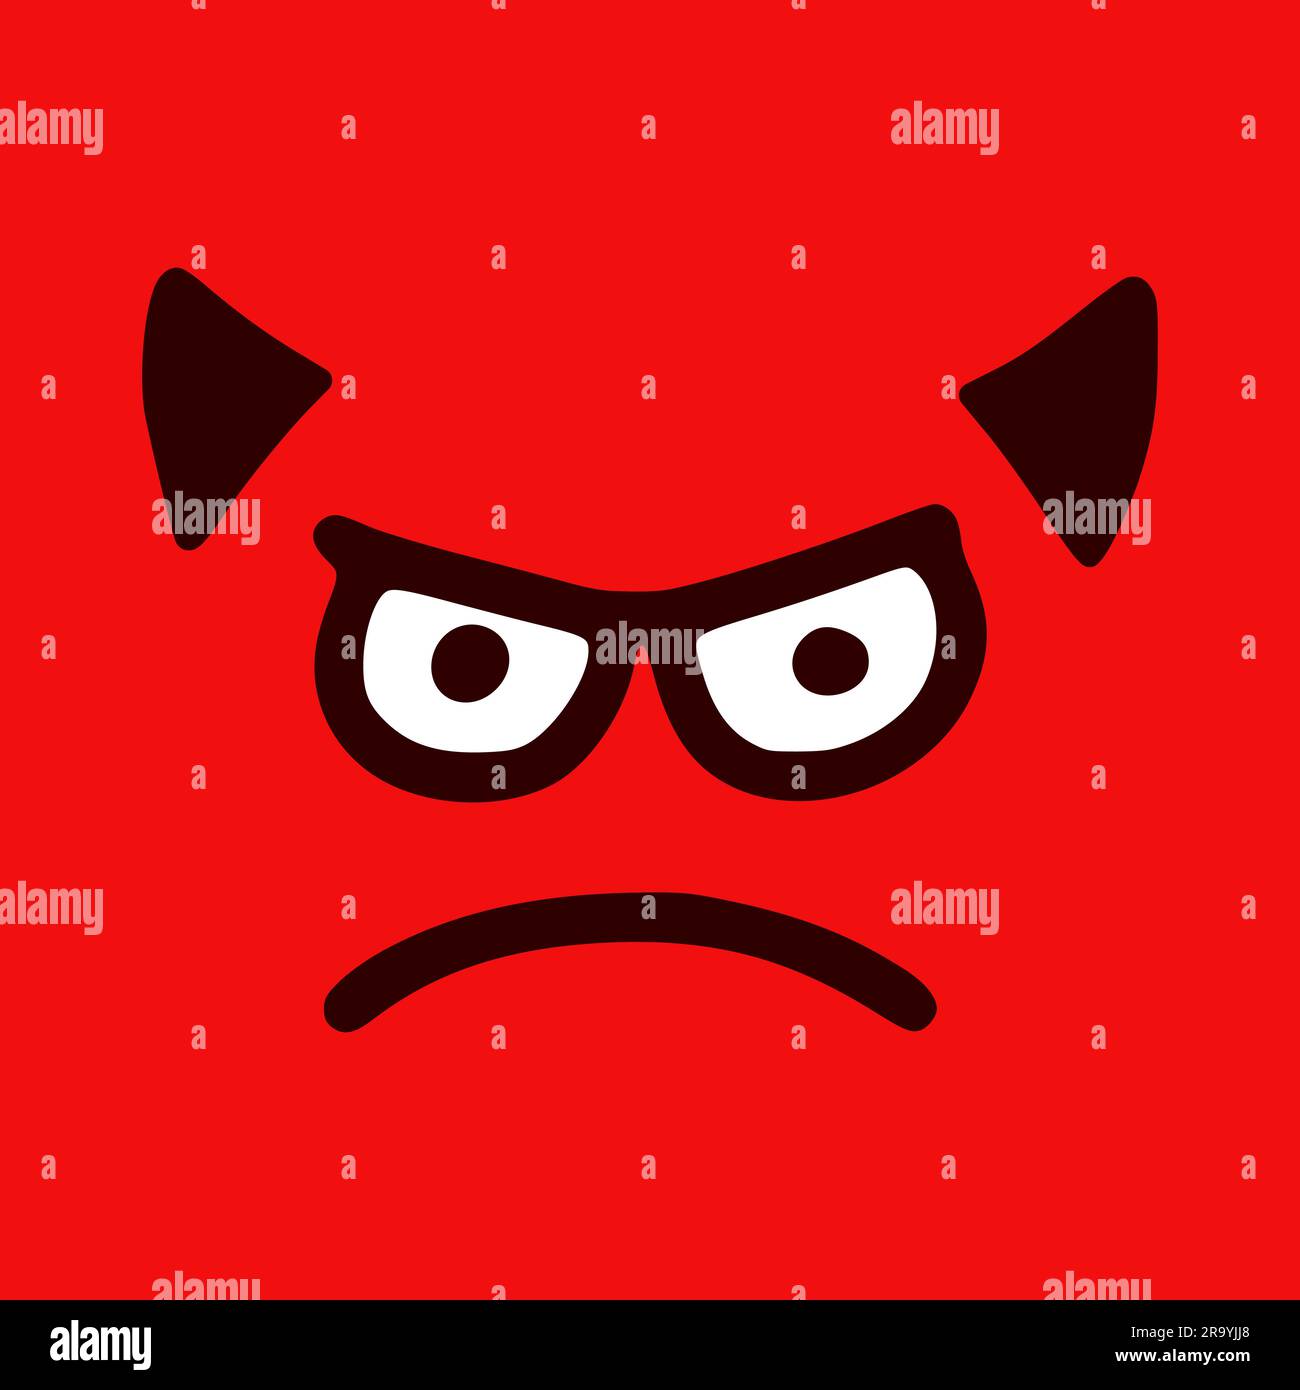 Damn emoticon in doodle style. Cartoon face expressions isolated on red background Stock Vector